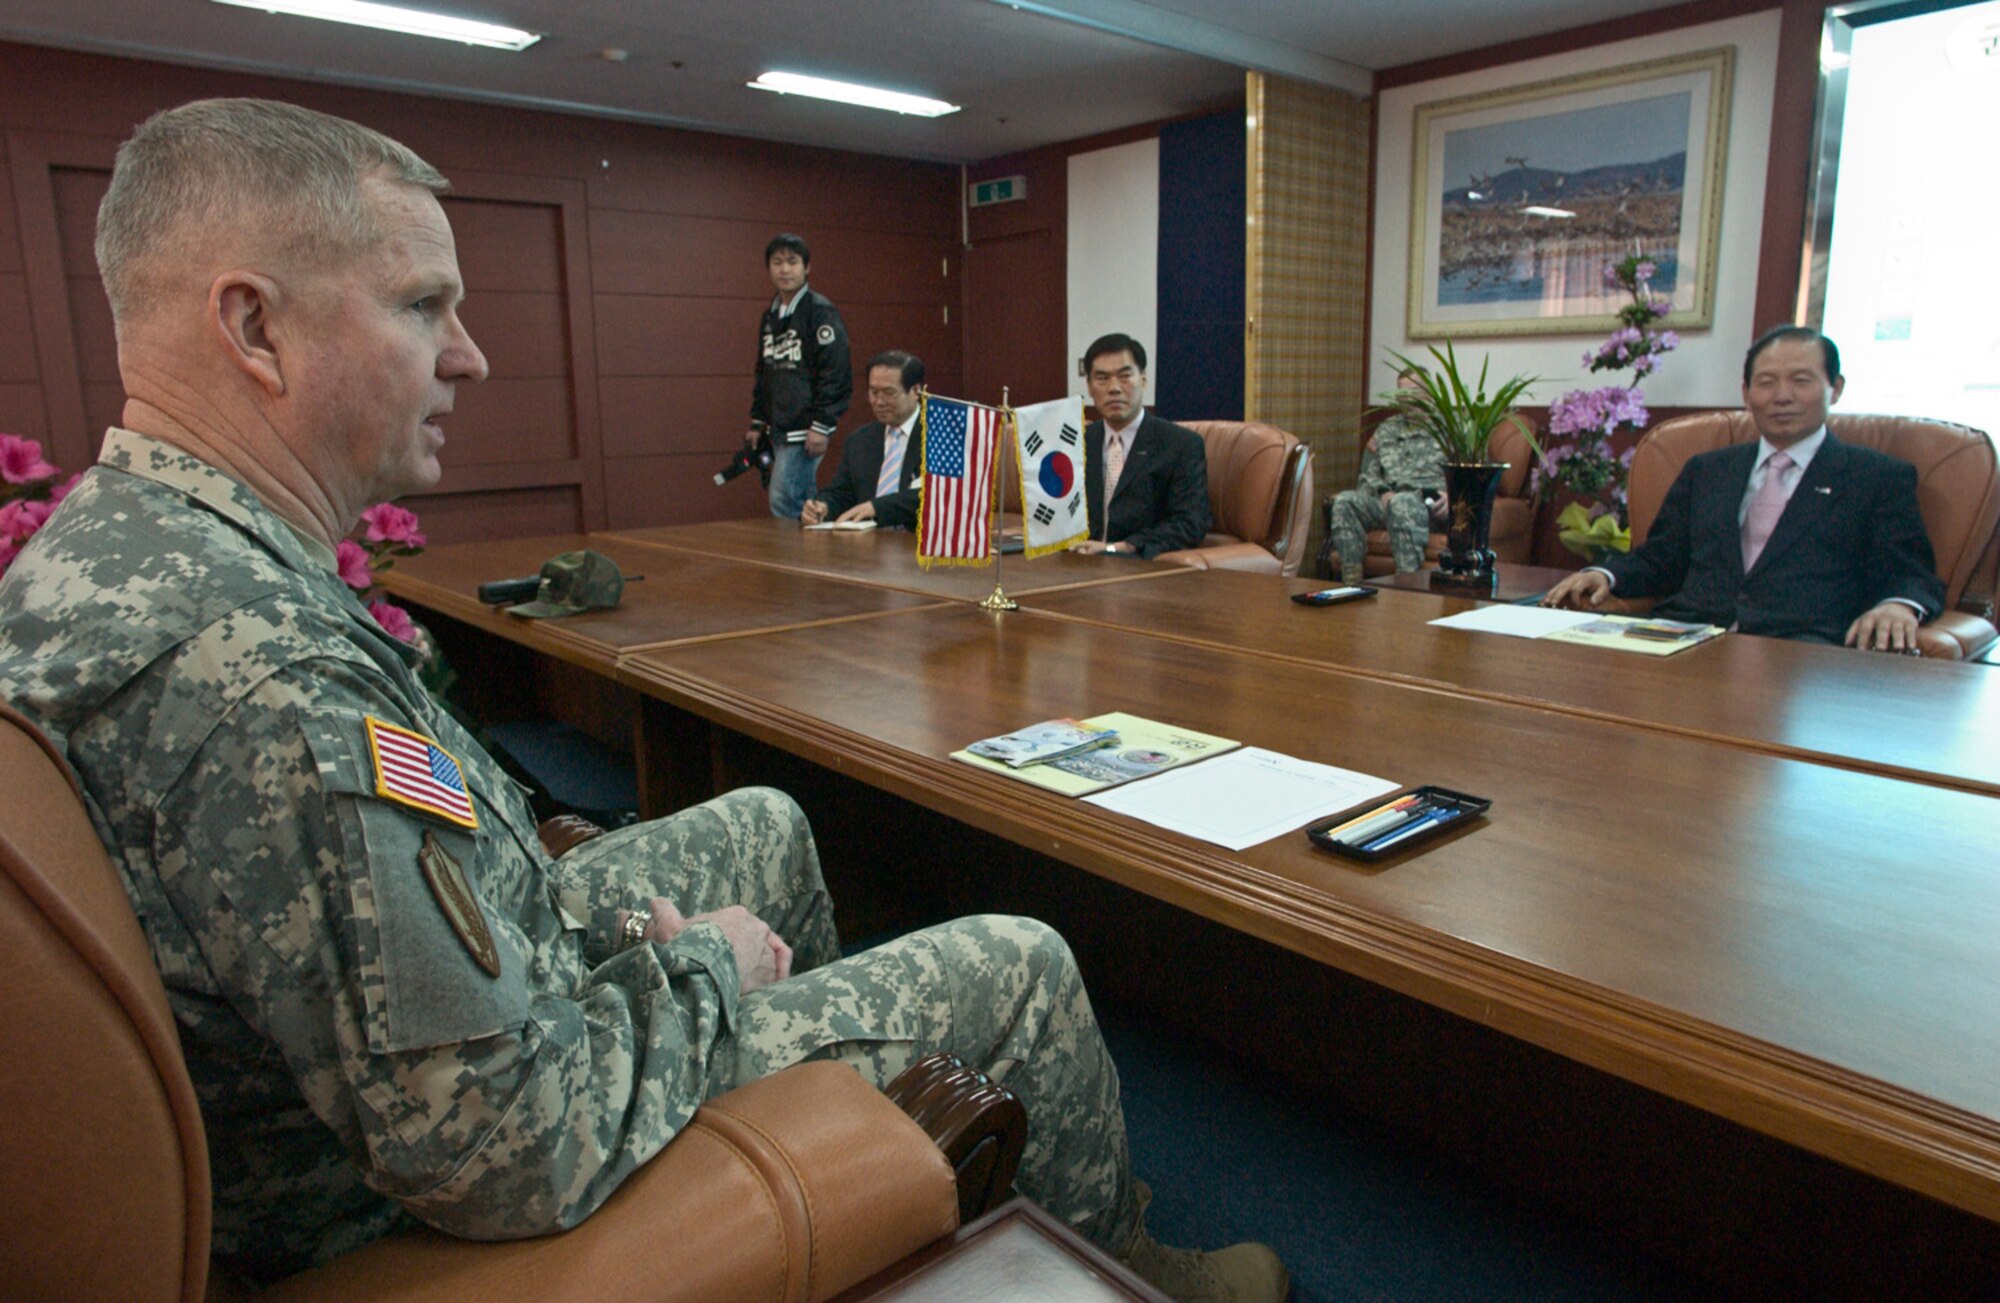 KUNSAN AIR BASE, Republic of Korea  April 10, 2007 -- Gen. B.B Bell, United States Forces Korea commander, speaks with Gunsan City mayor Mr. Moon, Dong Shin April 10 after making an unexpected visit to his office. After hearing about the support the city provides to base personnel, Gen. Bell said he personally wanted to thank the mayor for all he and his staff have done for the Airmen and Soldiers assigned to Kunsan. (Air Force photo/Senior Airman Barry Loo)                                